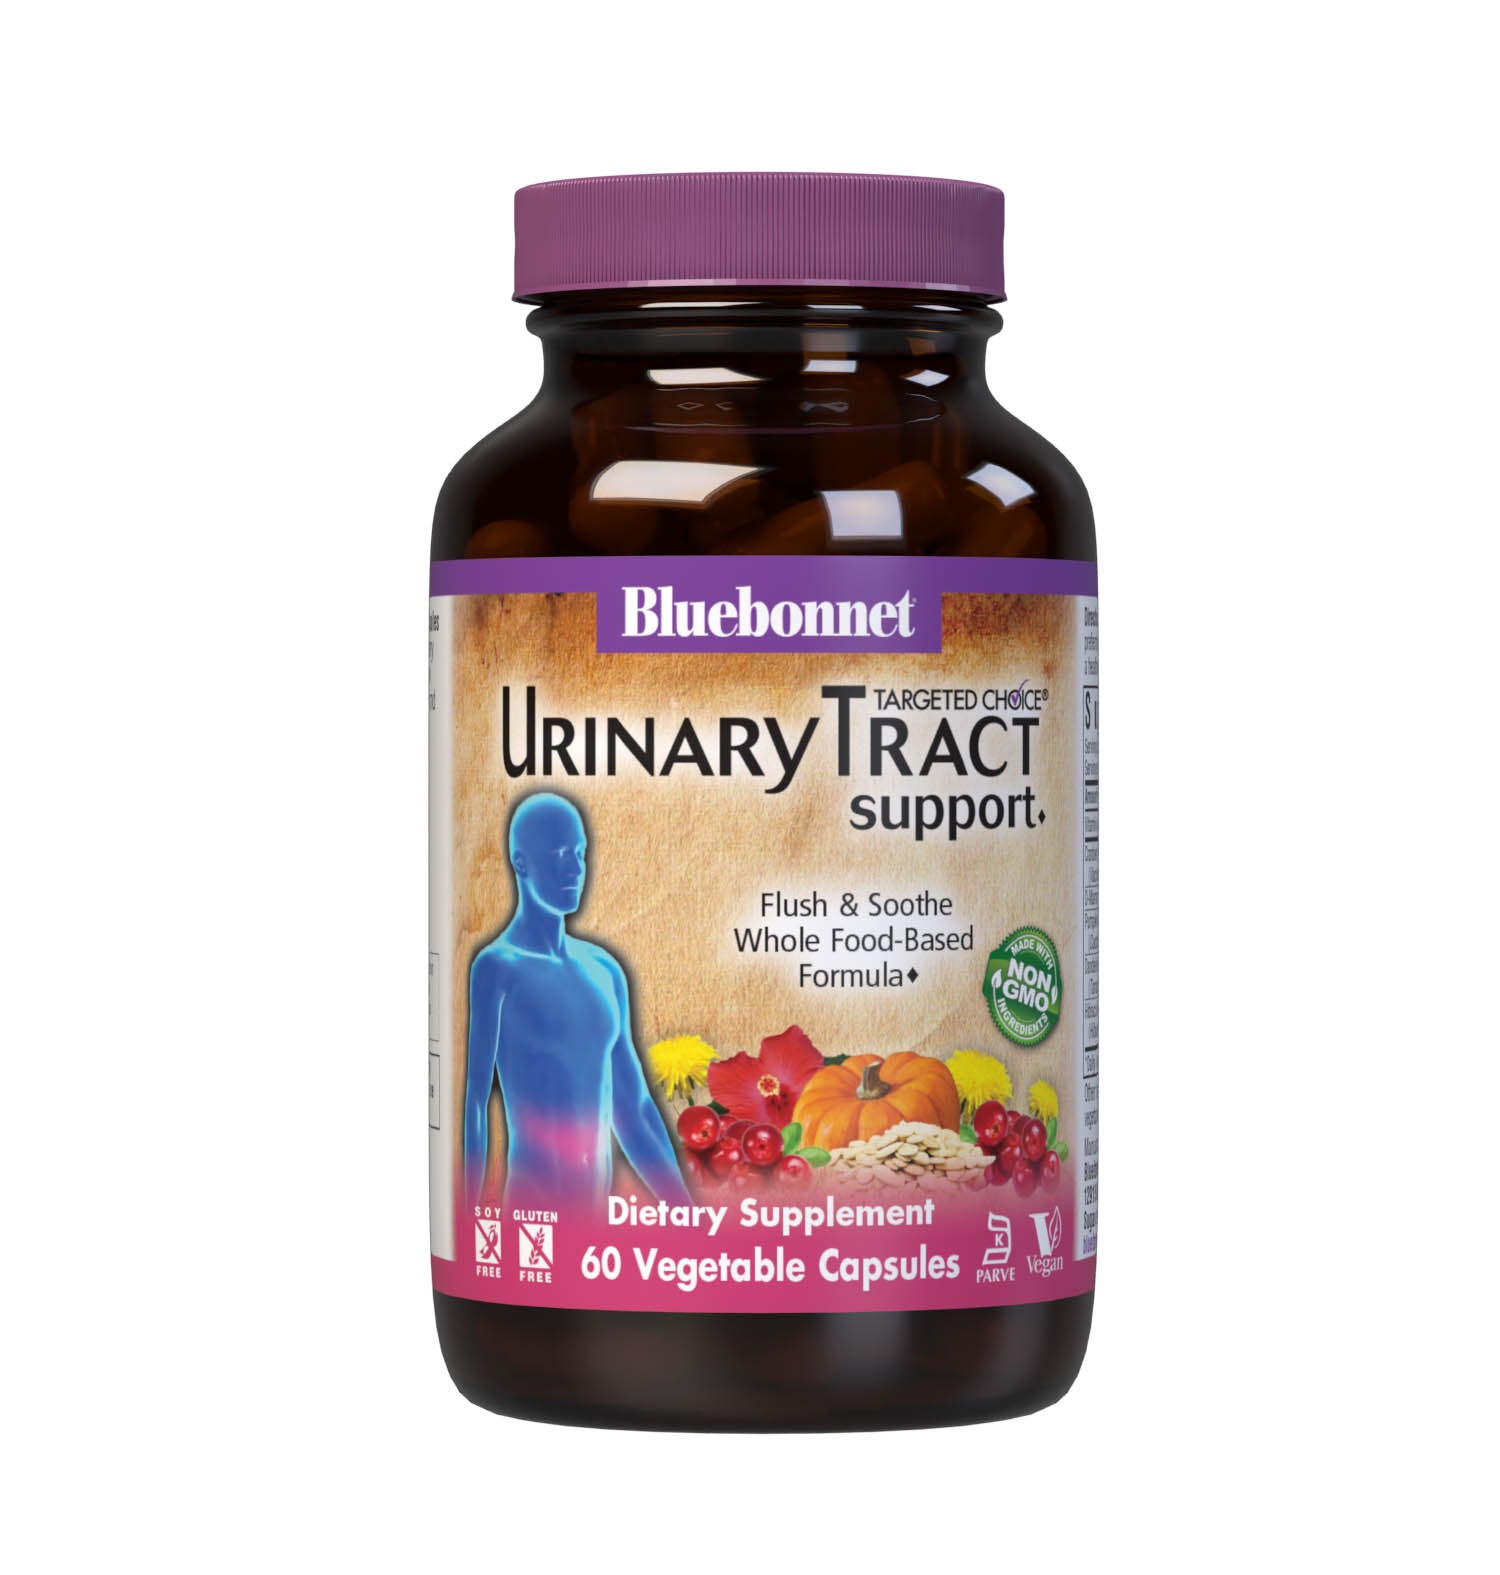 Bluebonnet’s Targeted Choice Urinary Tract Support Capsules are specially formulated with a blend of D-mannose, cranberry fruit extract and identity-preserved (IP) vitamin C along with complementary, sustainably harvested or wildcrafted herbs and botanicals. This soothing maintenance formula helps support a healthy urinary tract by flushing waste from the system and providing a nourishing environment for healthy flora to thrive. #size_60 count